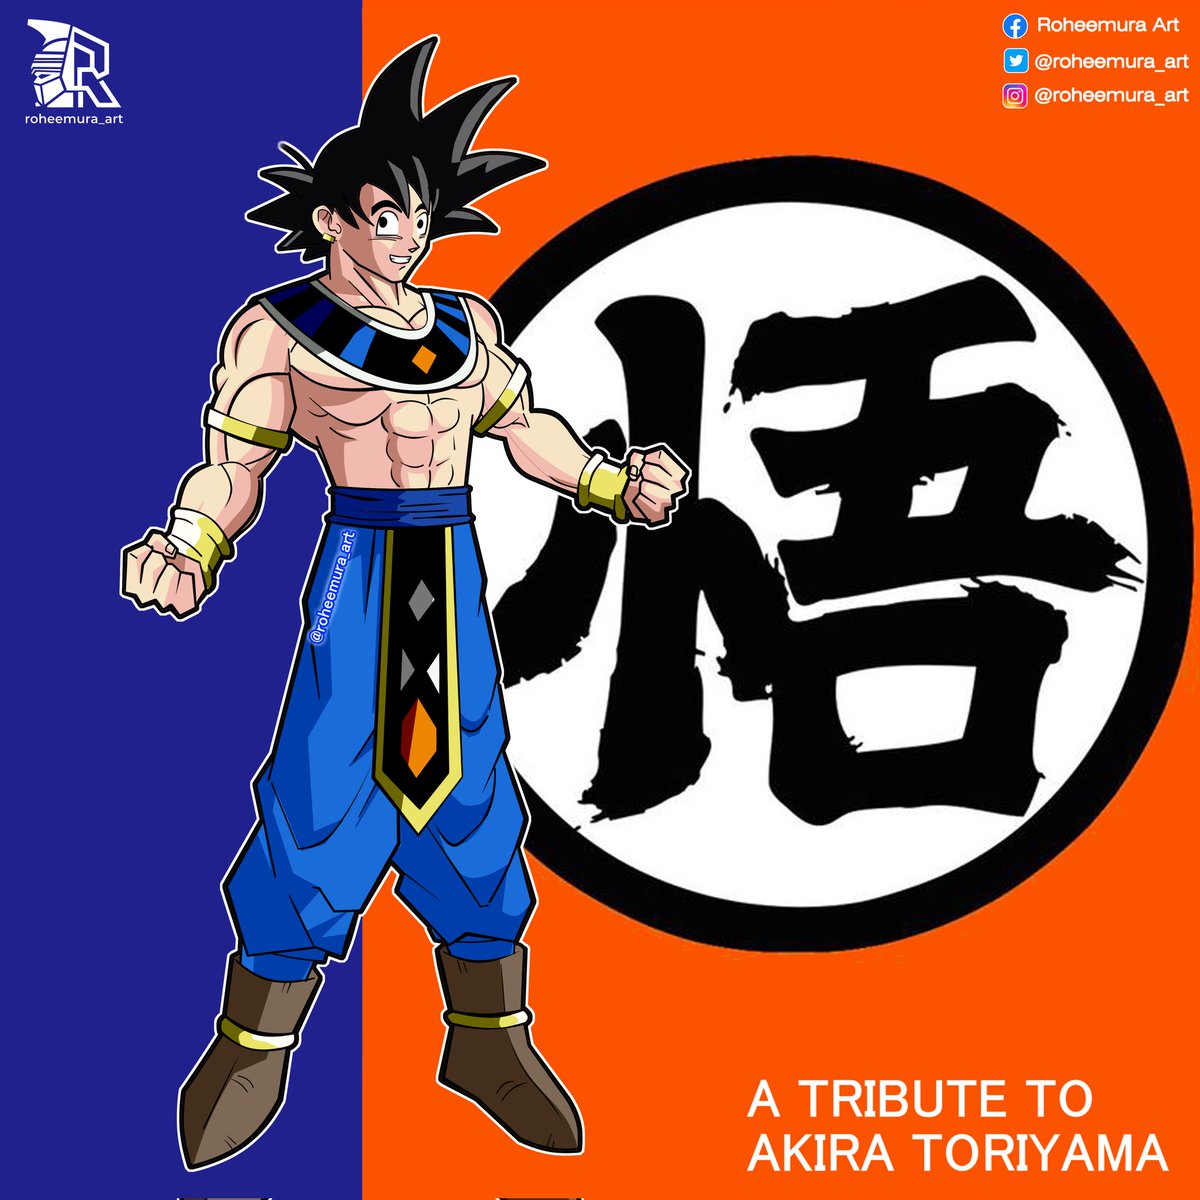 I remember my early days when I drew lots of dragon ball stuff… Thank you Toriyama Sensei Farewell legend.. You are my inspiration... Too many memories #dragonball #akiratoriyama #Toriyama #toriyamasensei #songoku